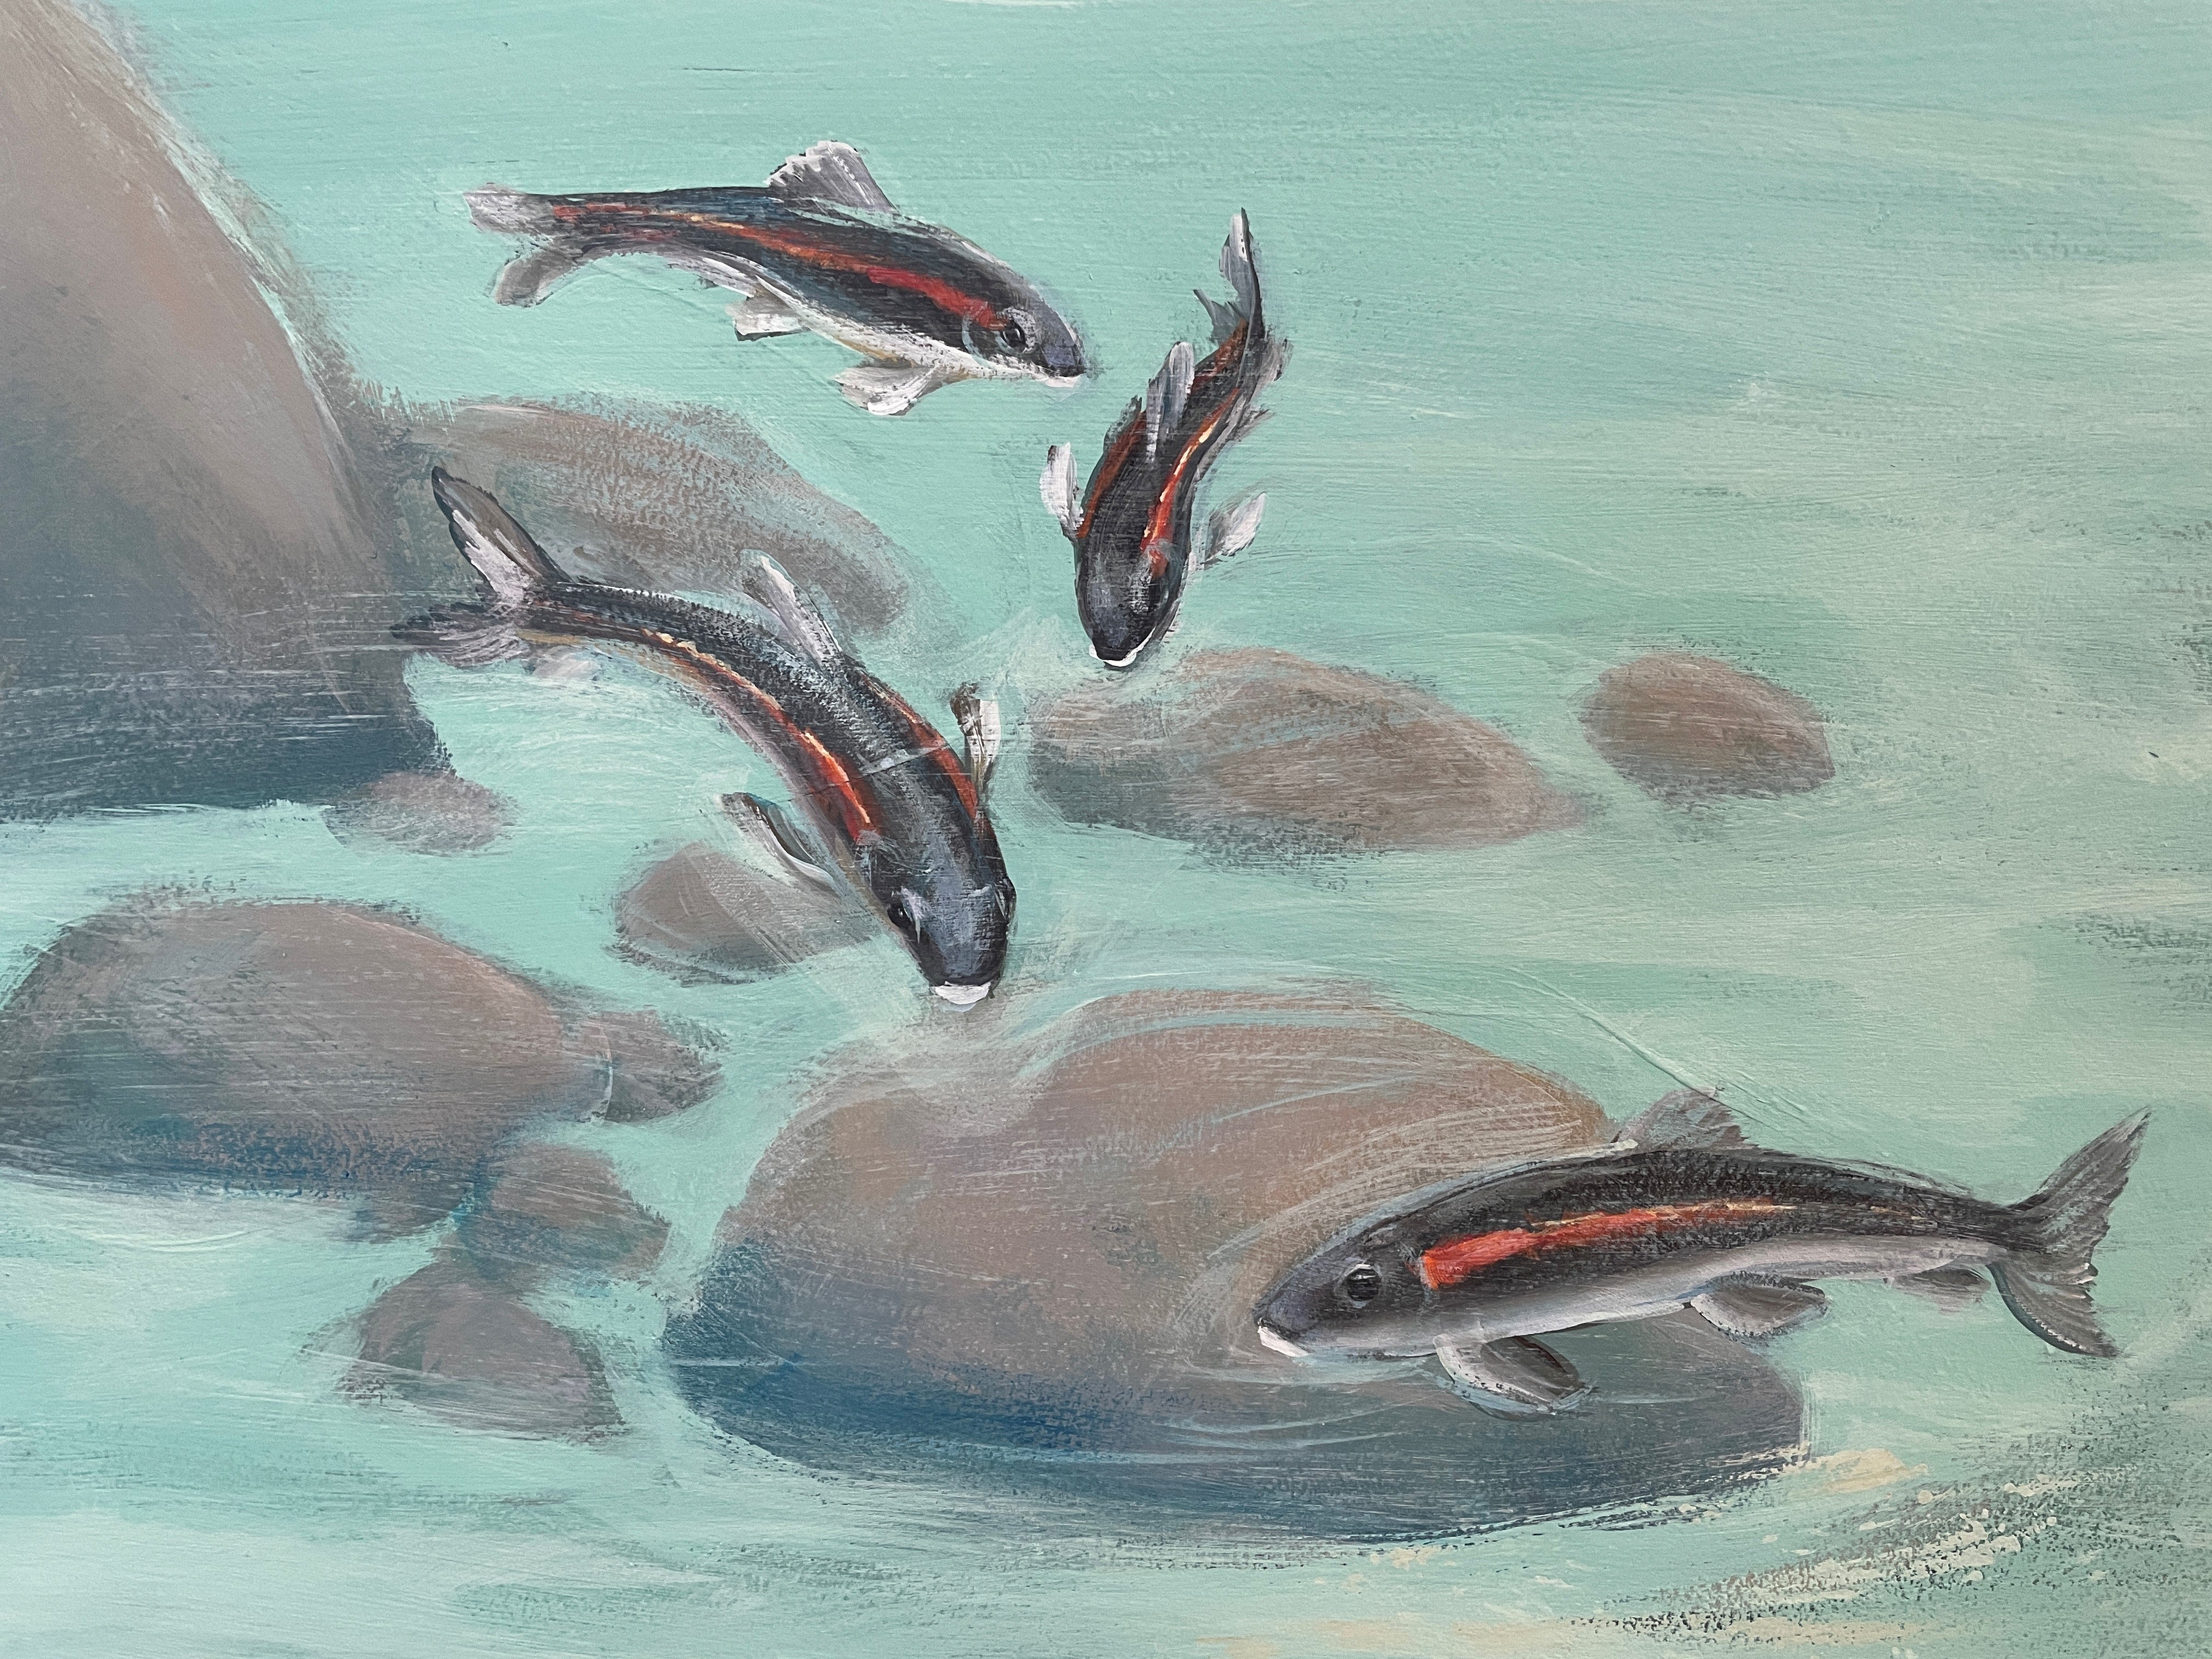 A part of the mural featuring Tahoe sucker fish in blue water and some brown rocks.